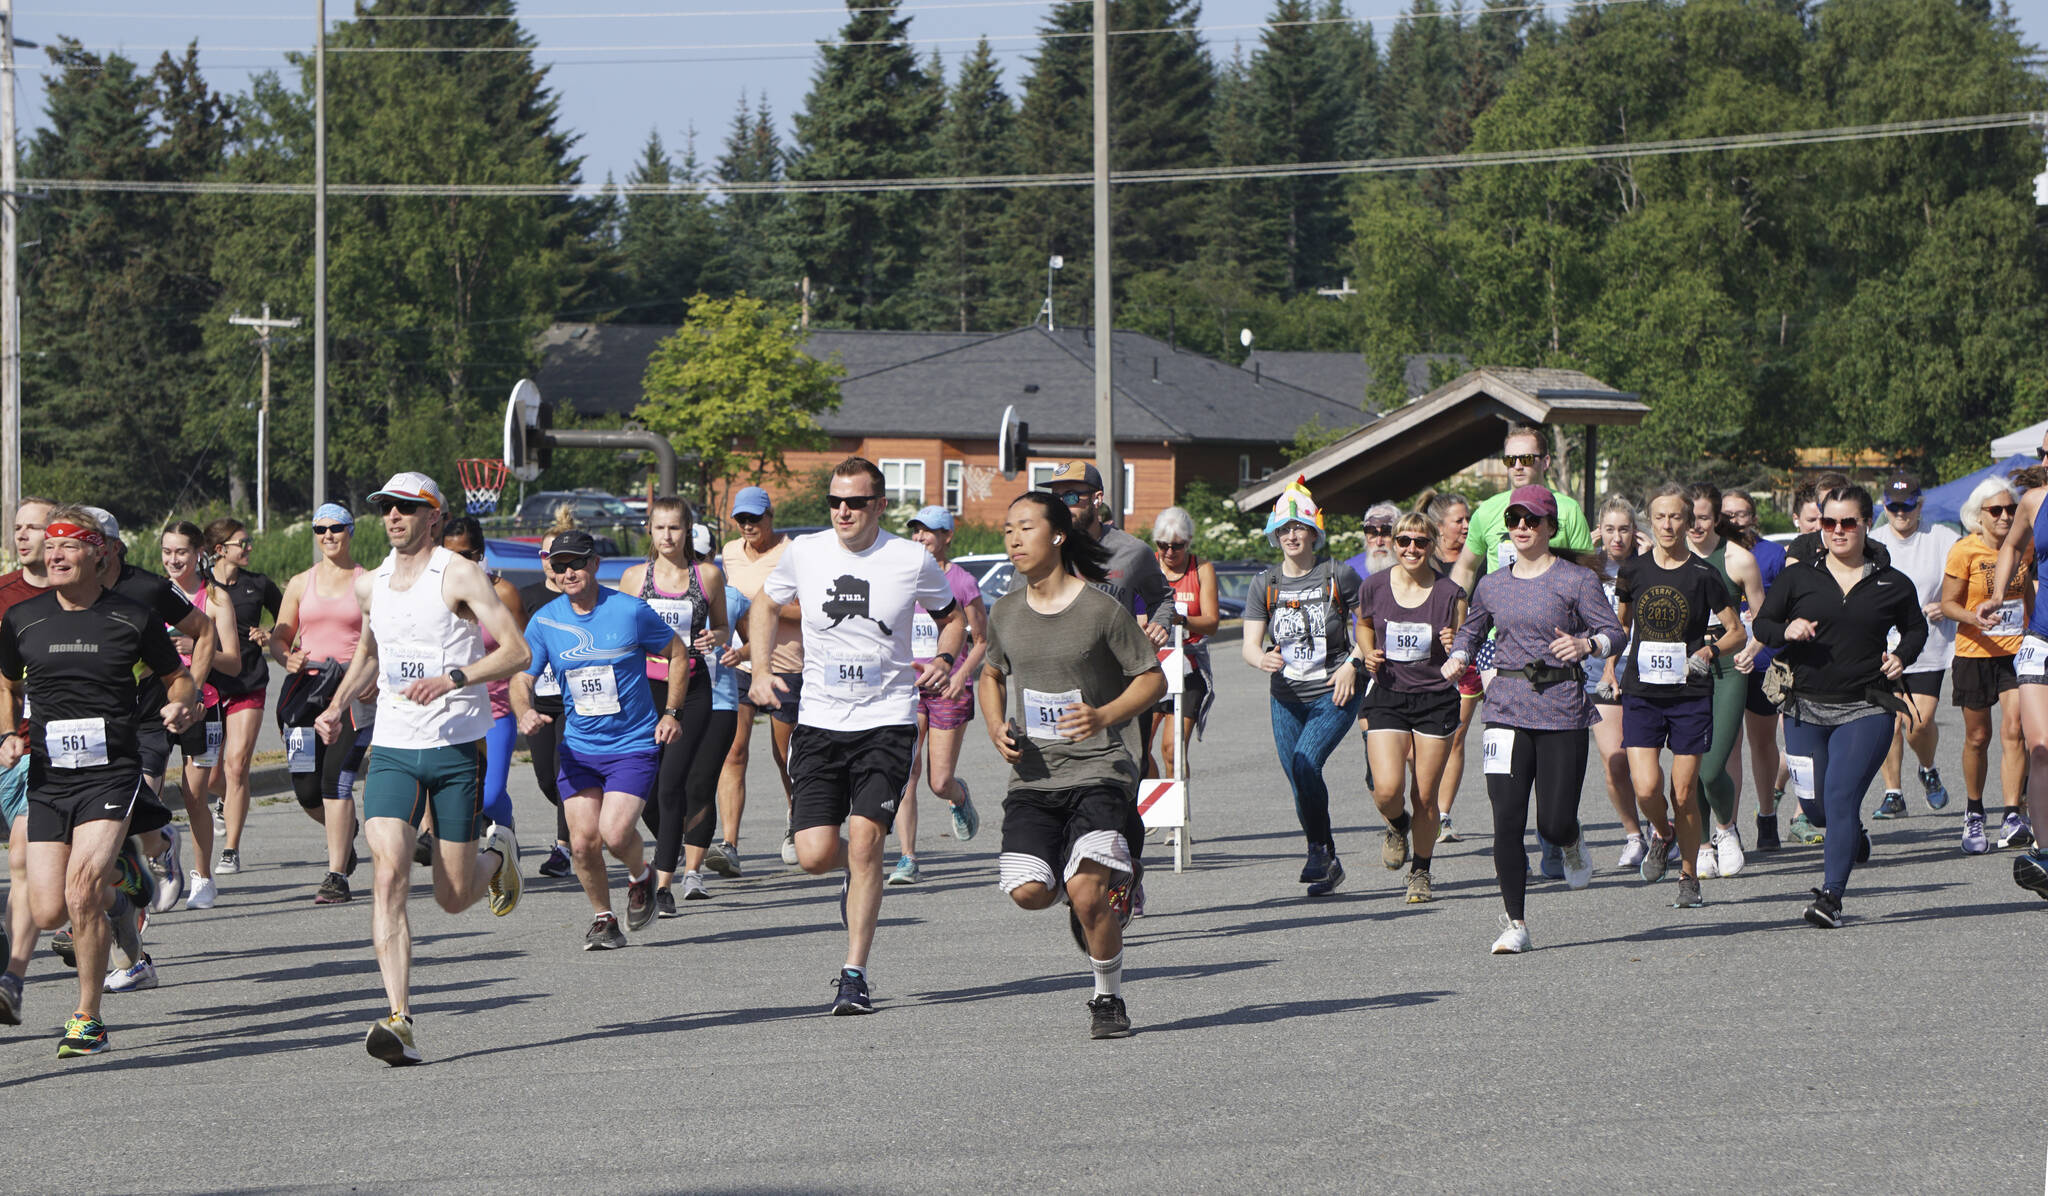 The Homer Spit Run 10k runners take off at the start of the run on Saturday, June 25, 2022, at Homer High School in Homer, Alaska. (Photo by Michael Armstrong/Homer News)